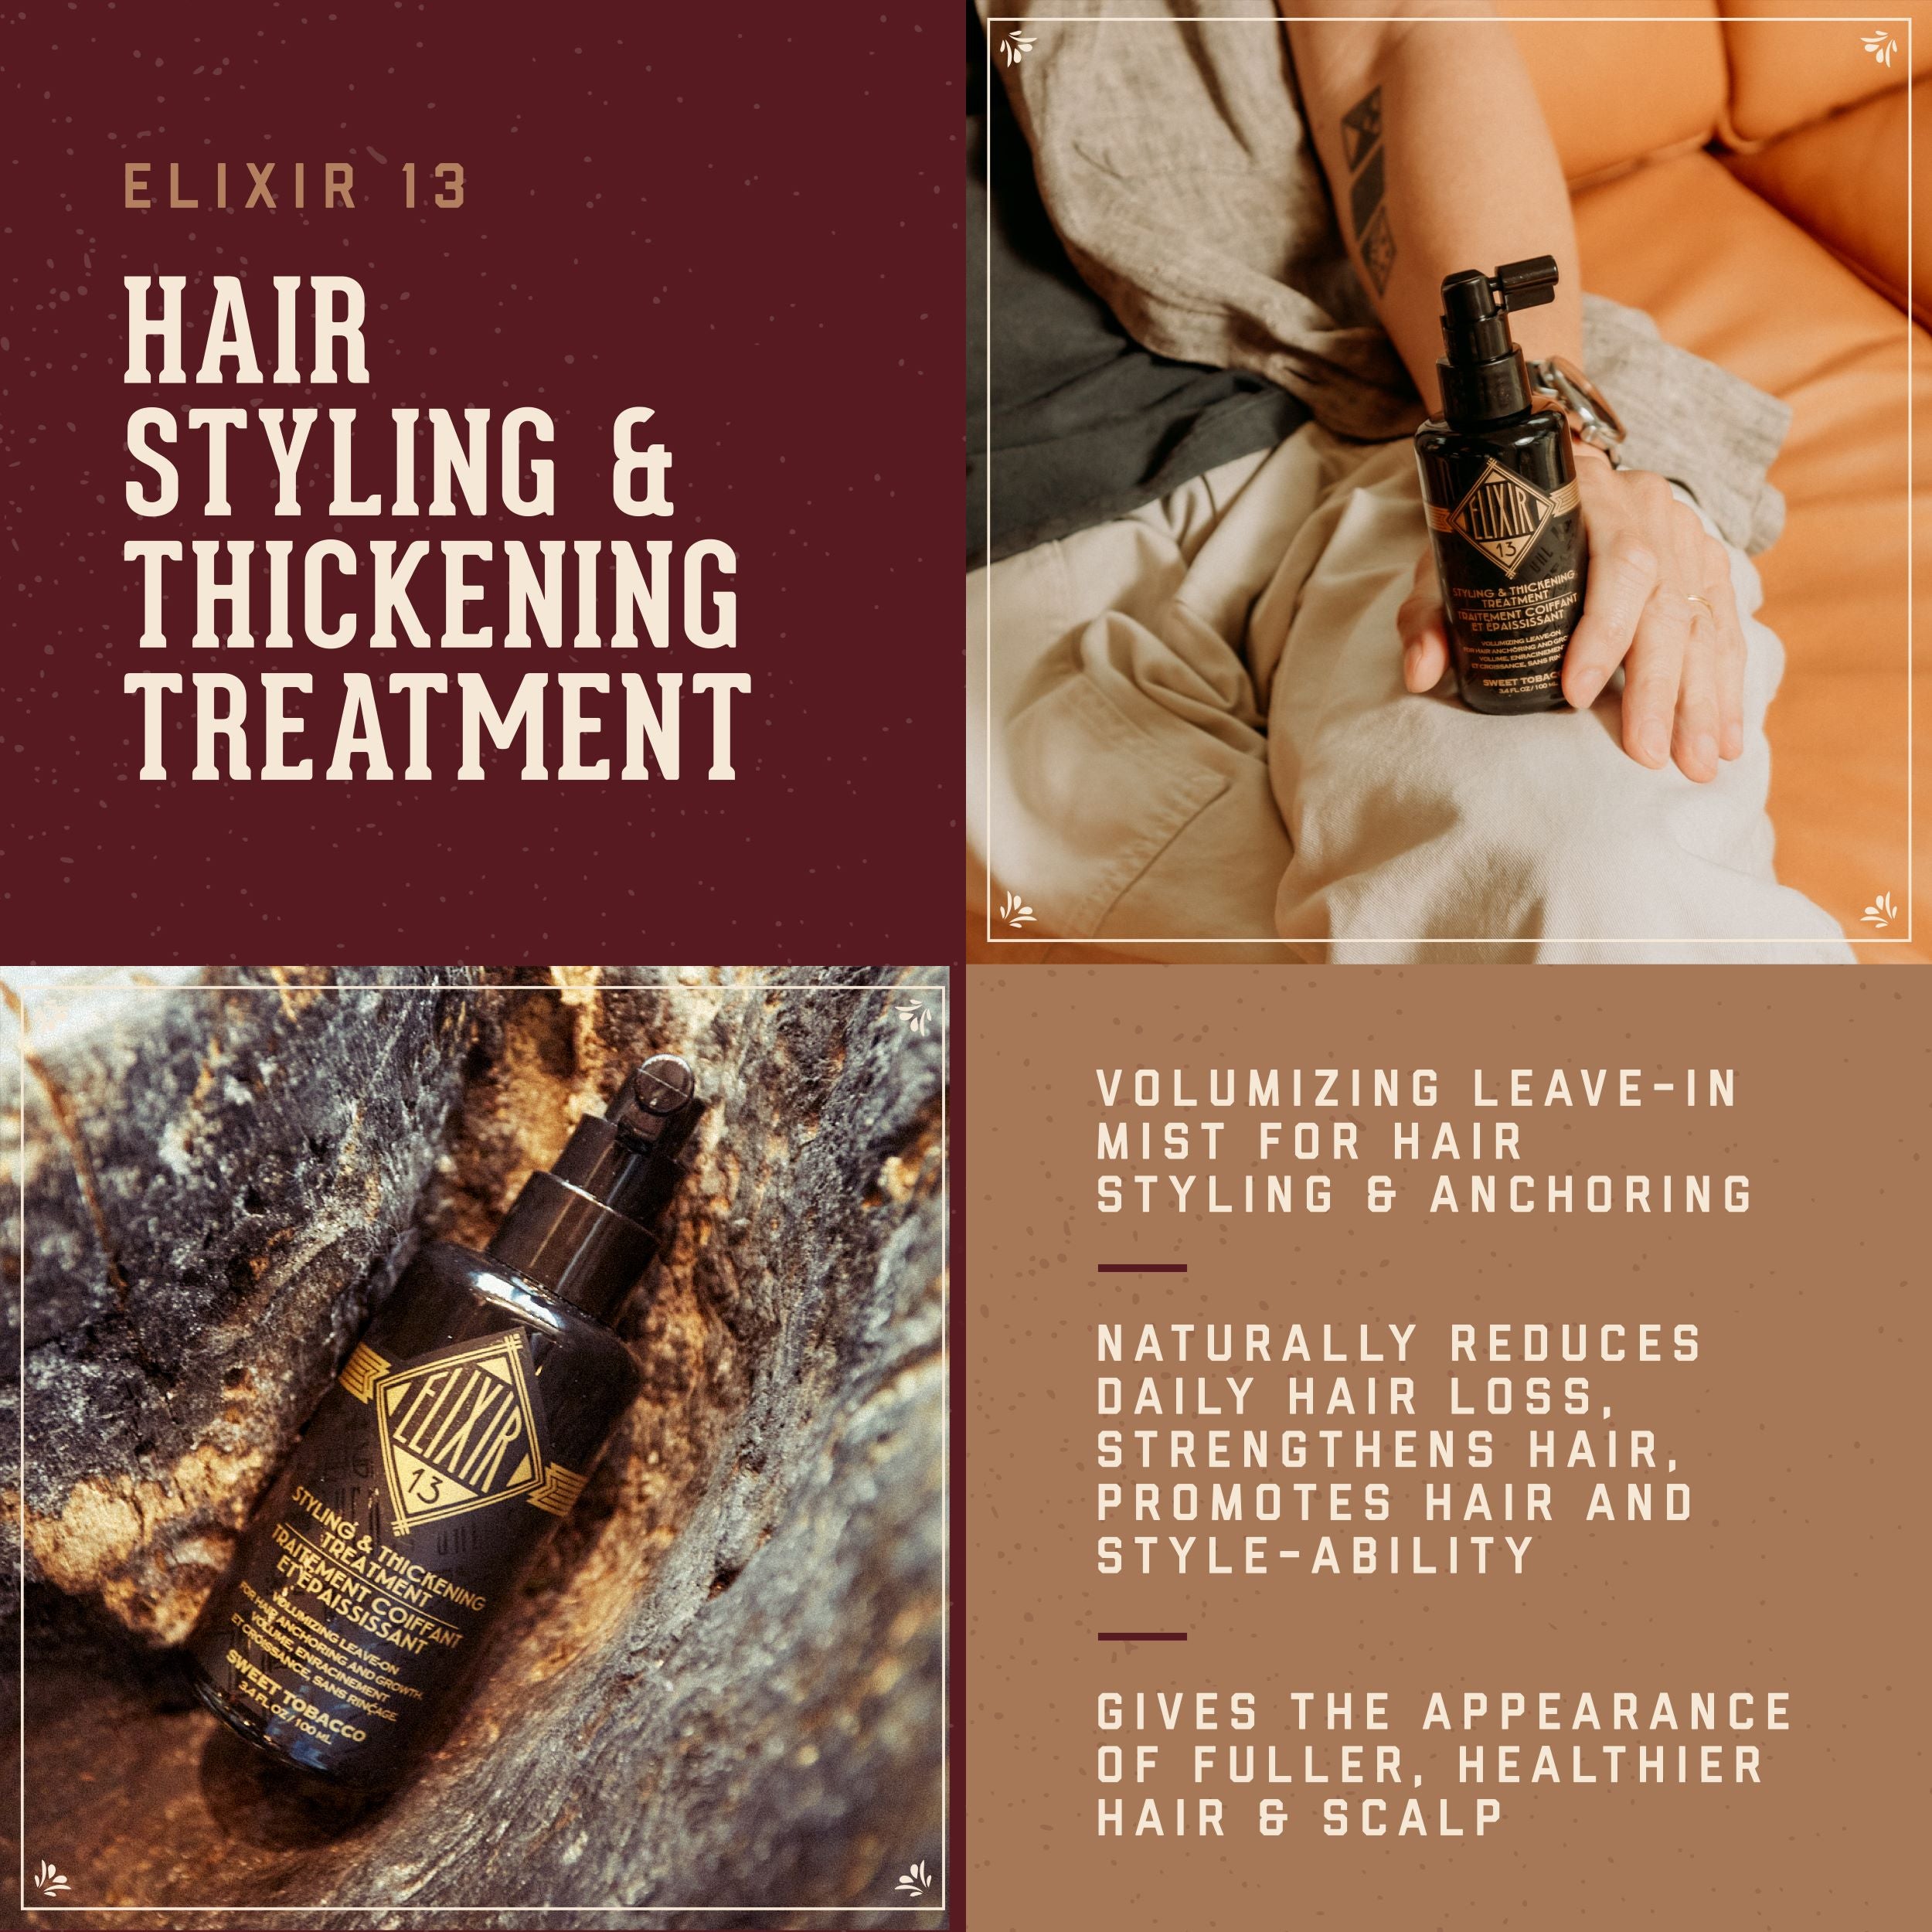 Elixir 13 Hair Styling & Thickening Treatment.   Volumizing leave-in mist for hair styling and anchoring.  Naturally reduces daily hair loss, strenthens hair, promotes hair and style-ability.  Gives the appearance of fuller, healthier hair and scalp.